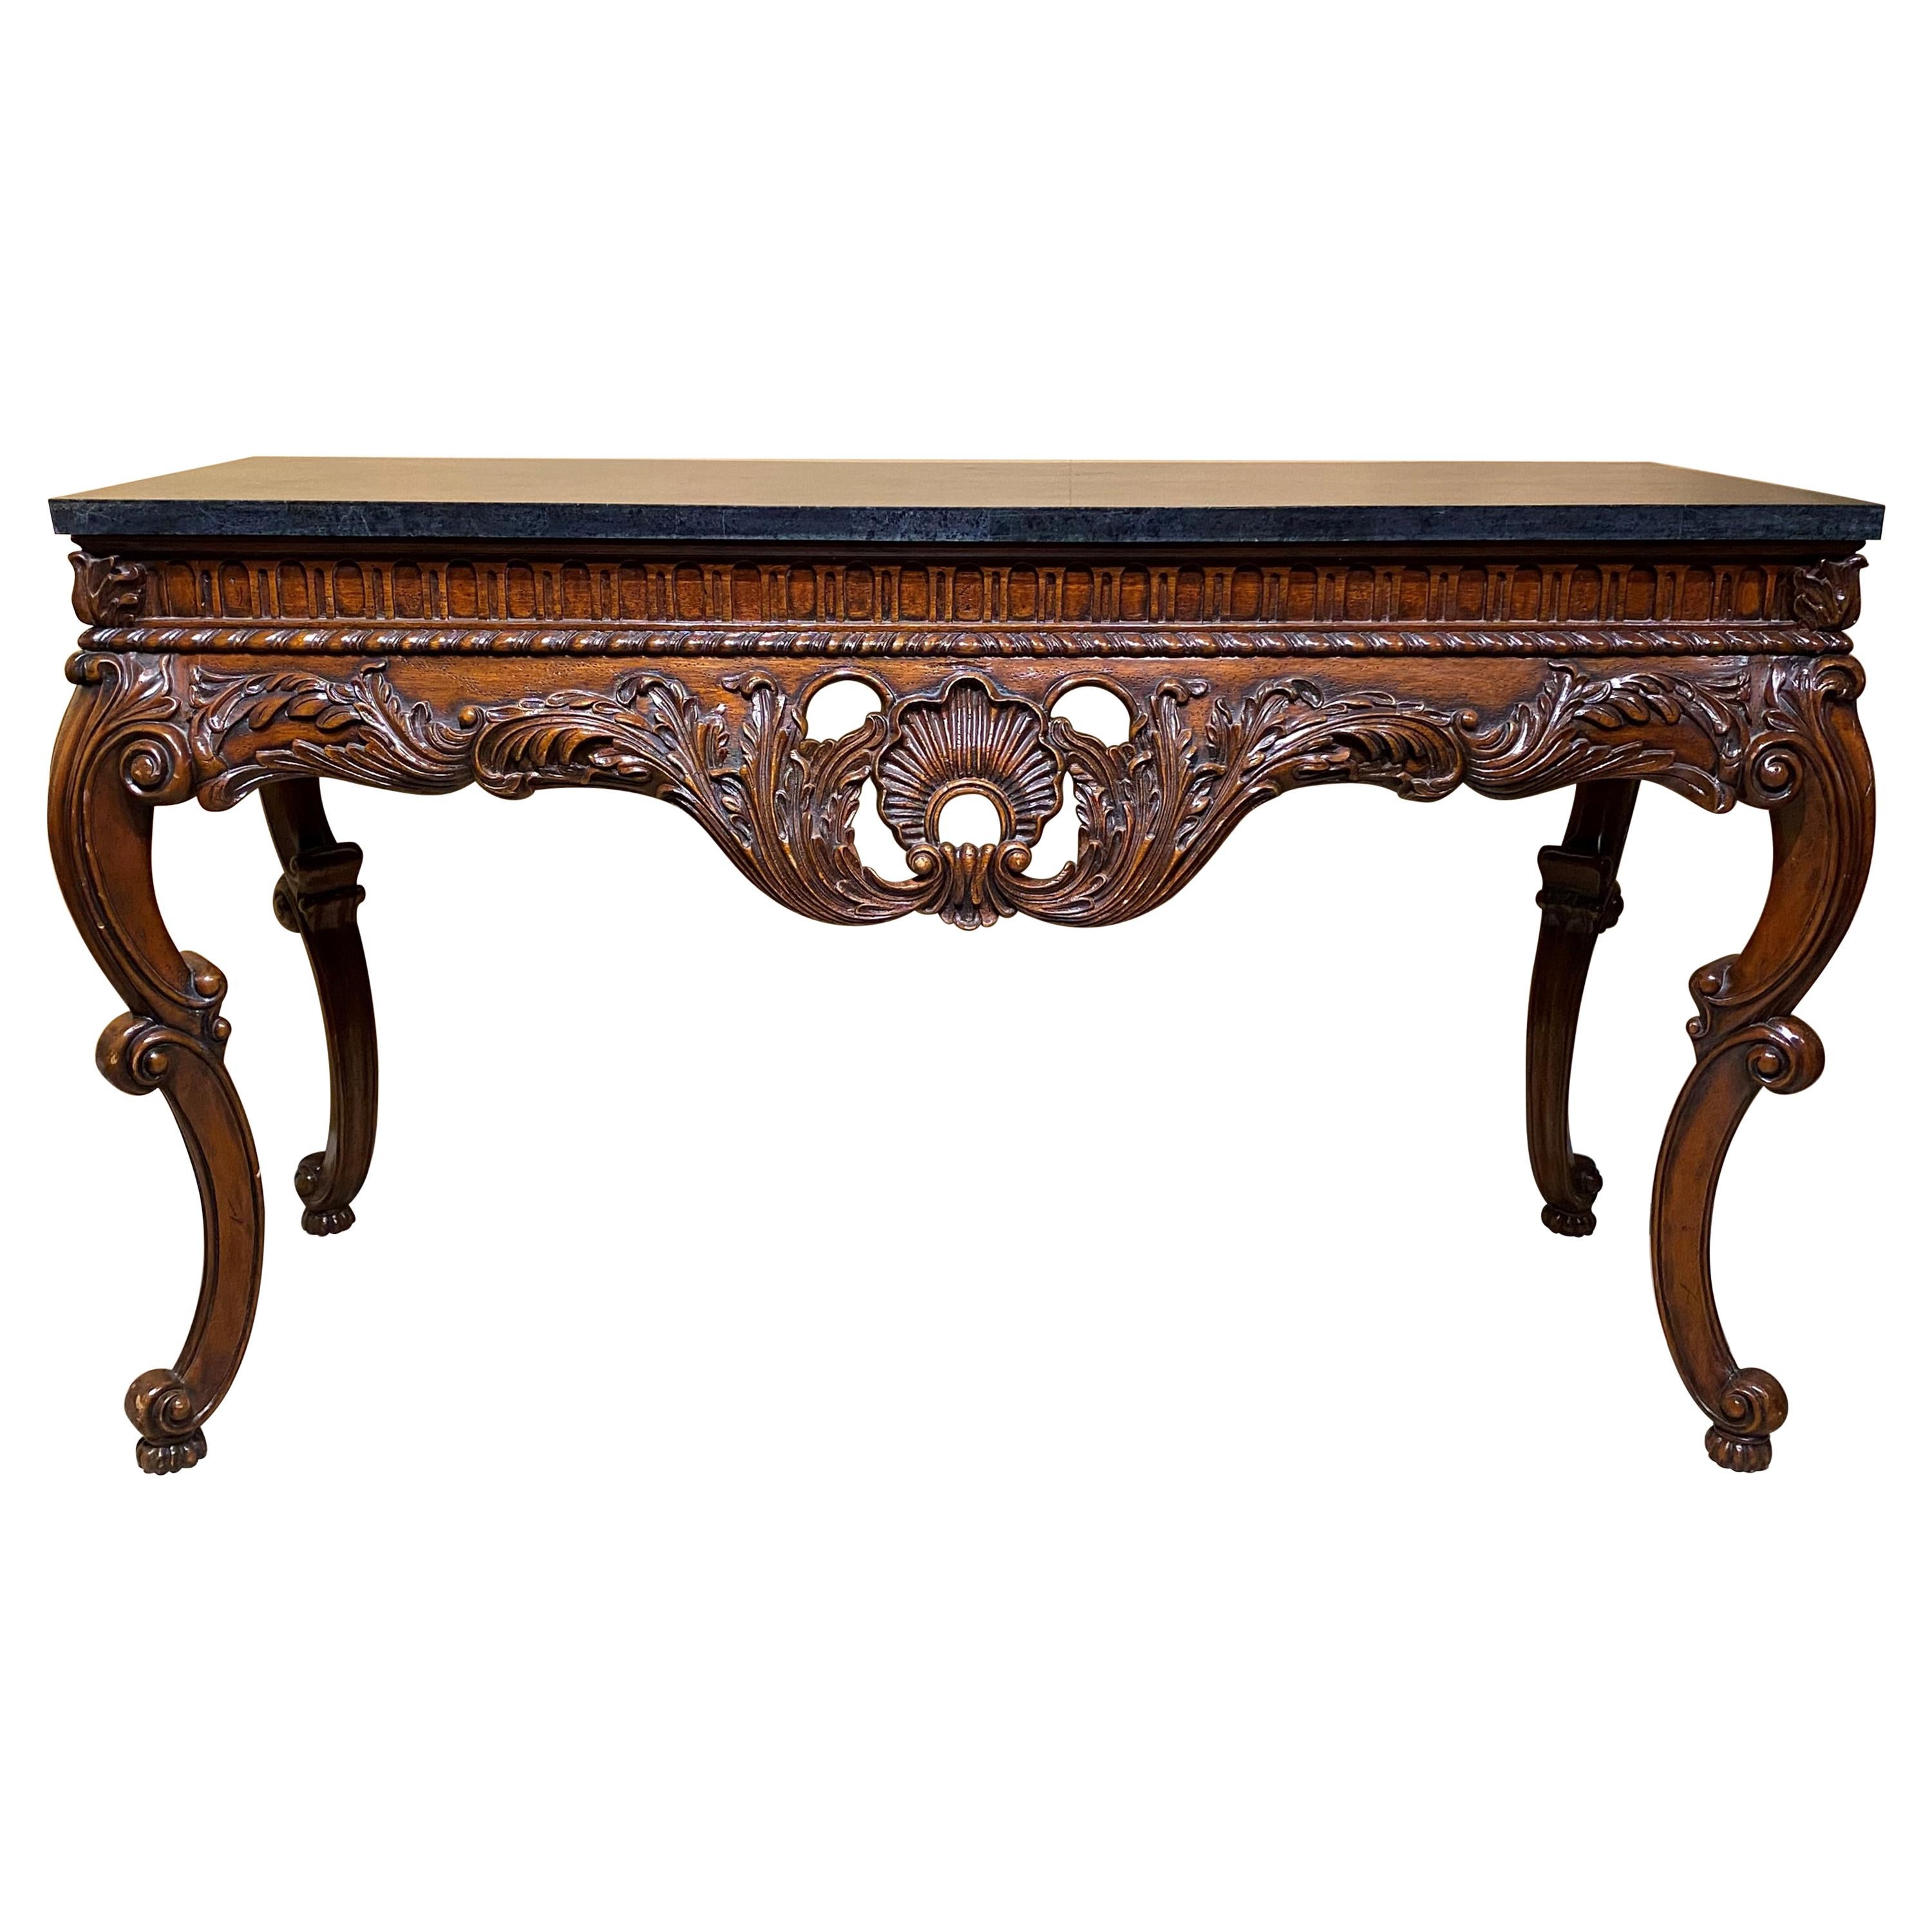 Large Irish Rococo Style Scroll Carved Fruitwood Console with Faux Stone Top